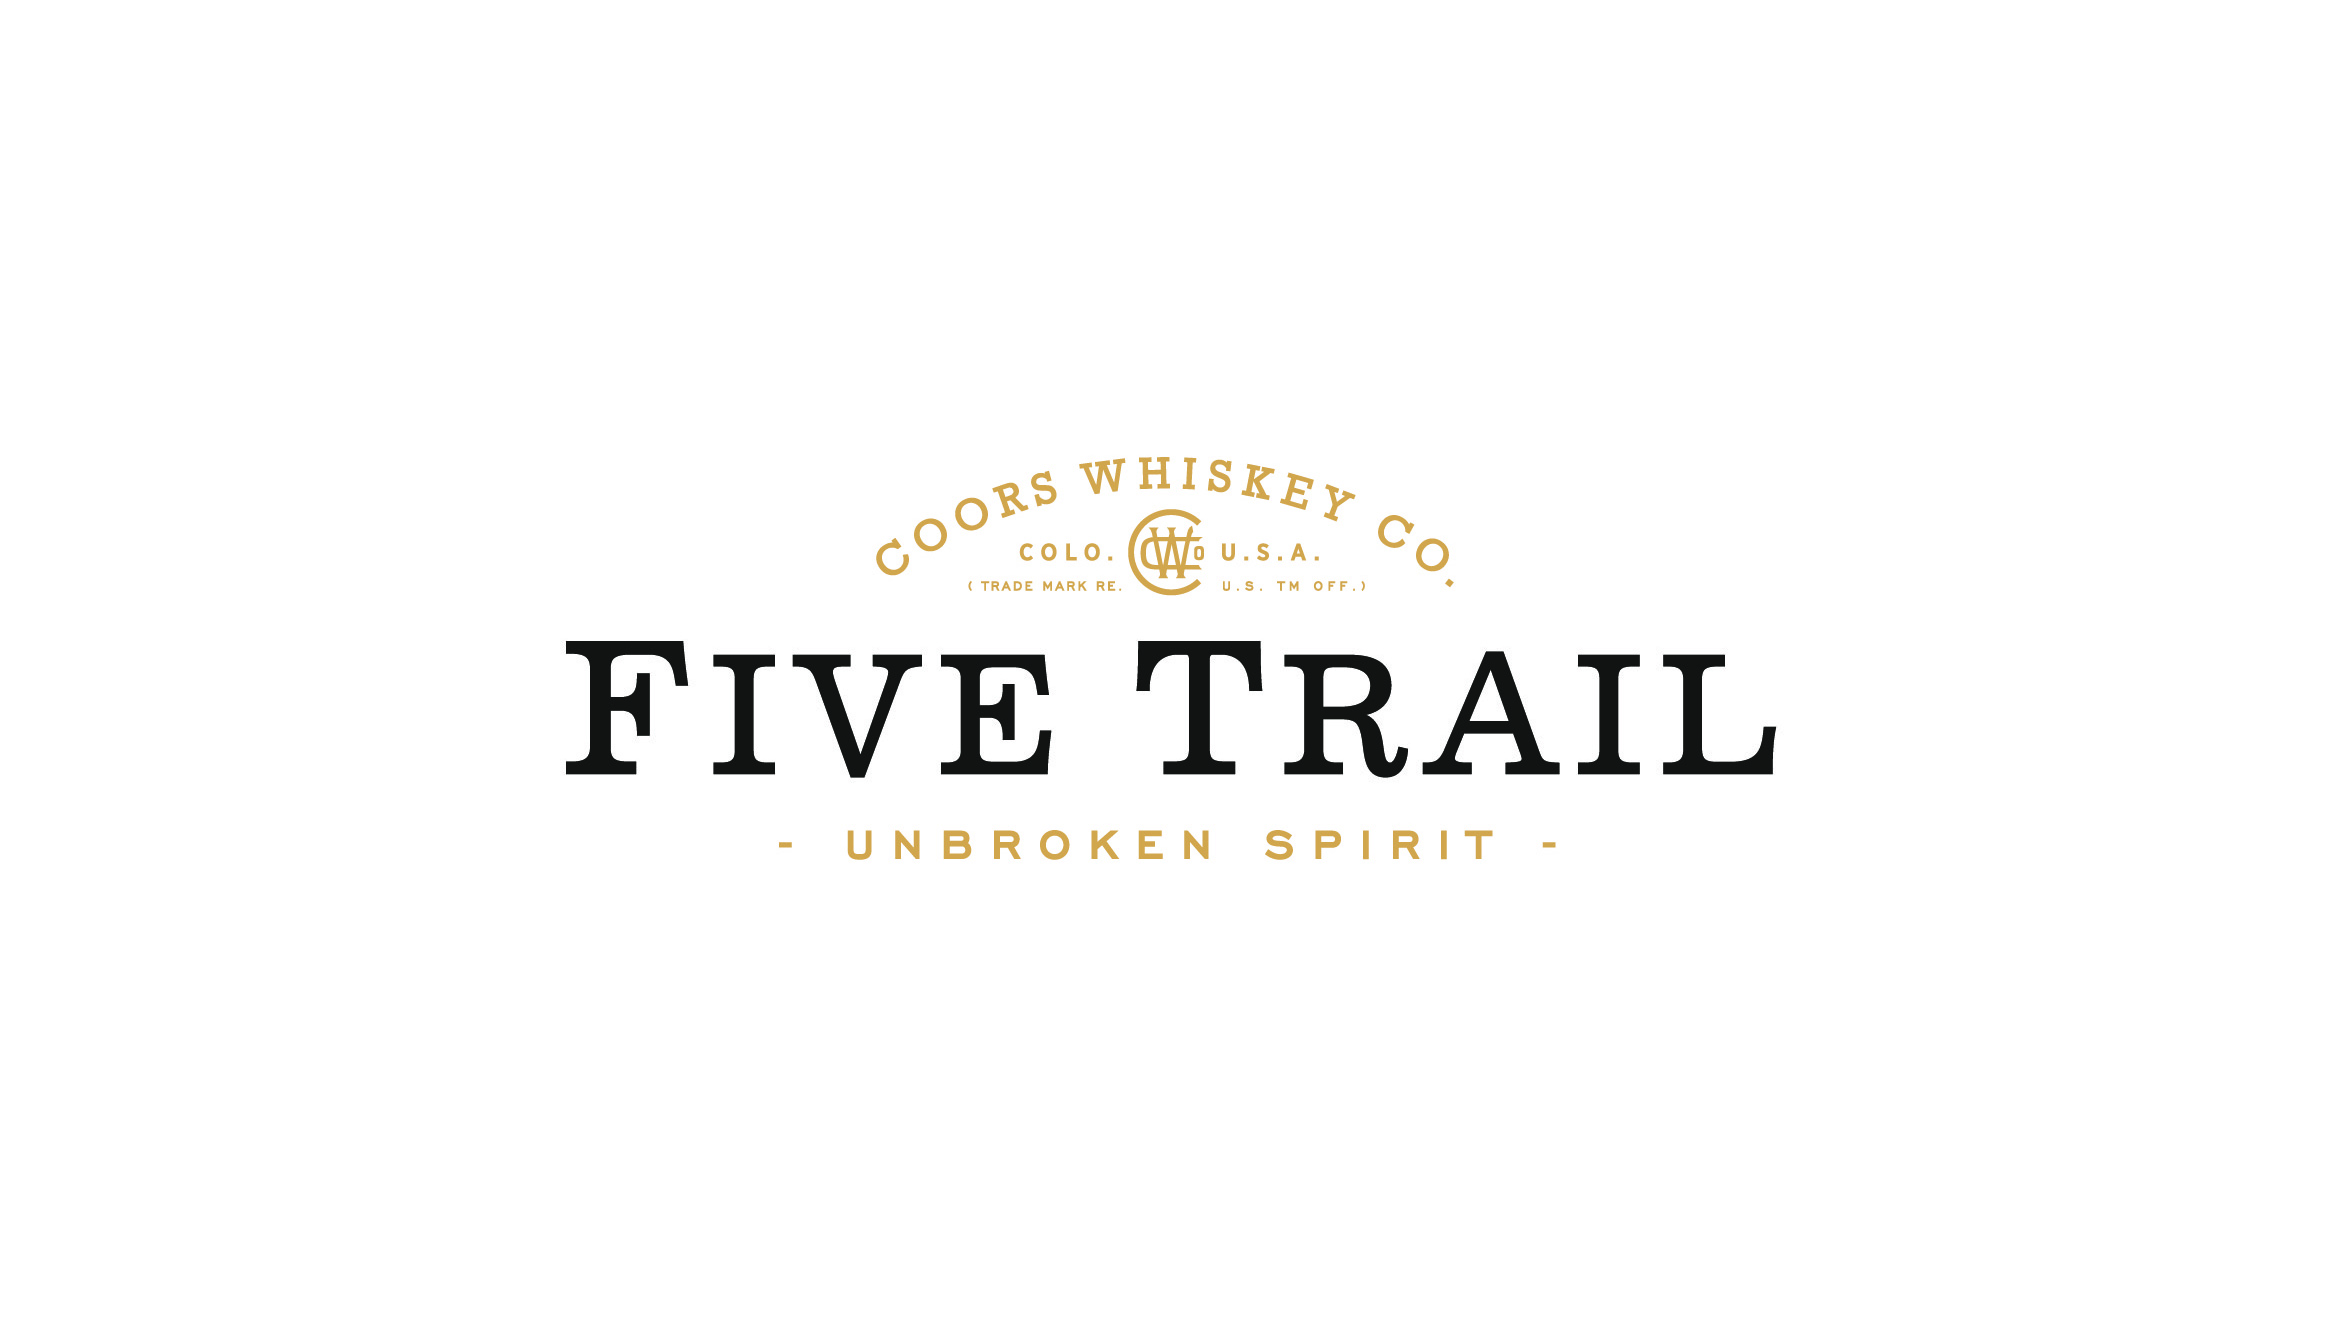 Five Trail whiskey - Coors Whiskey Co